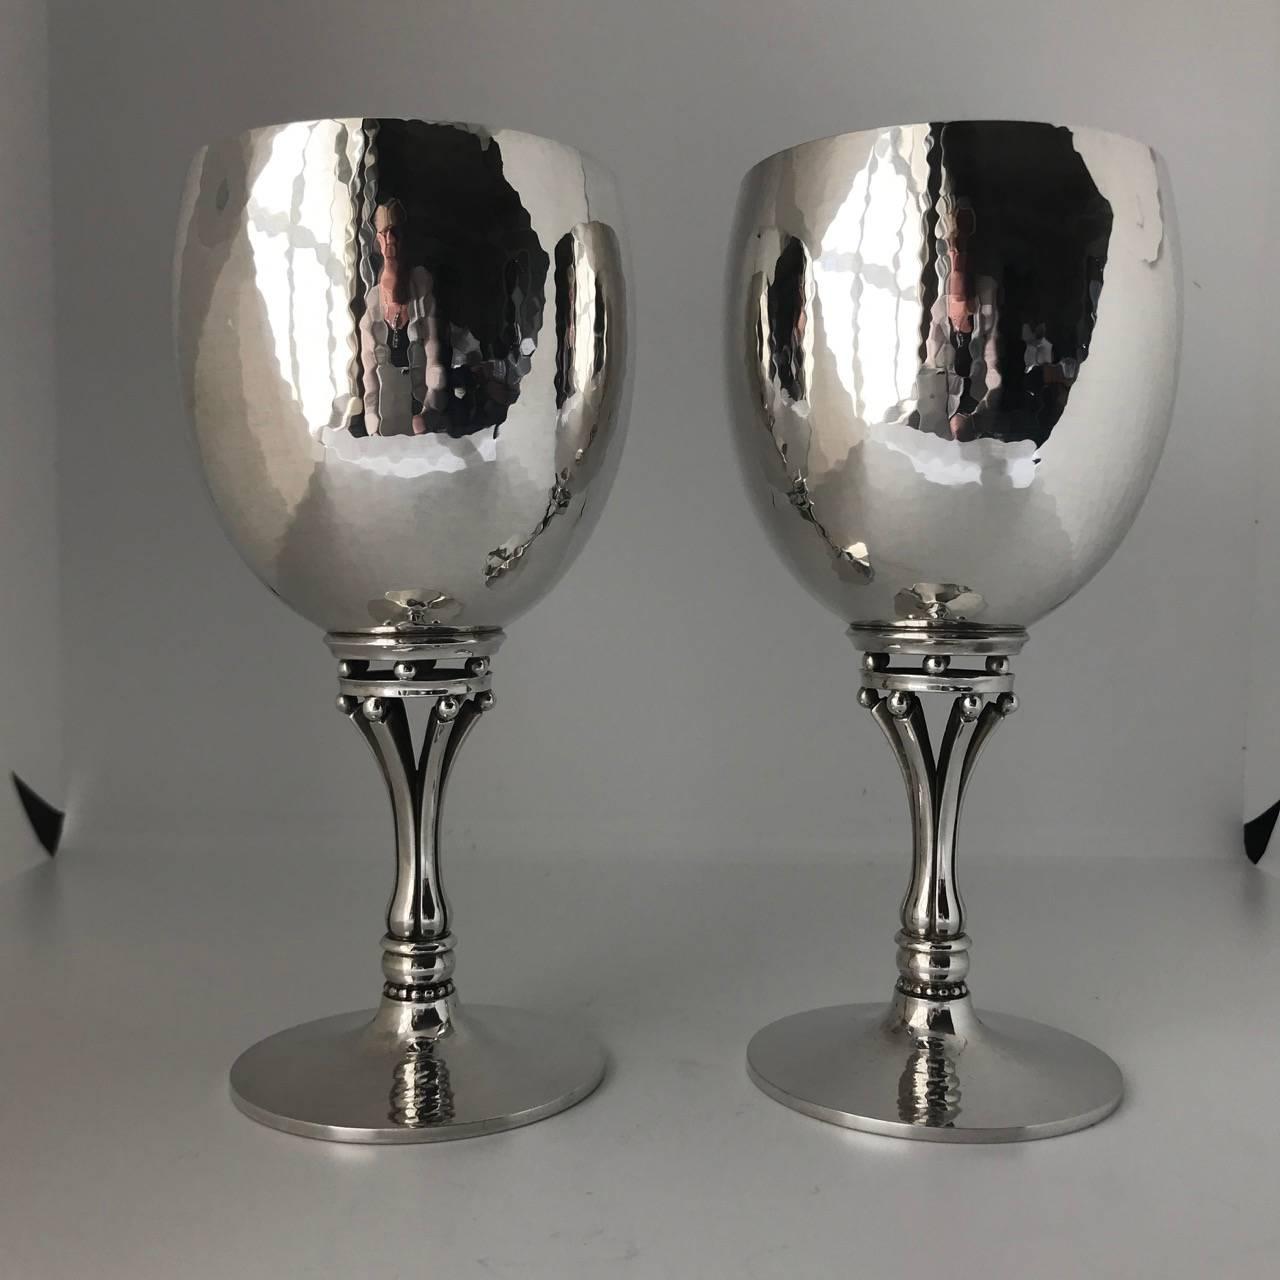 Georg Jensen sterling silver pair of goblets, No. 532C

This is the largest goblet Georg Jensen makes. Current retail is $3500 per piece.

Two pairs available.
  